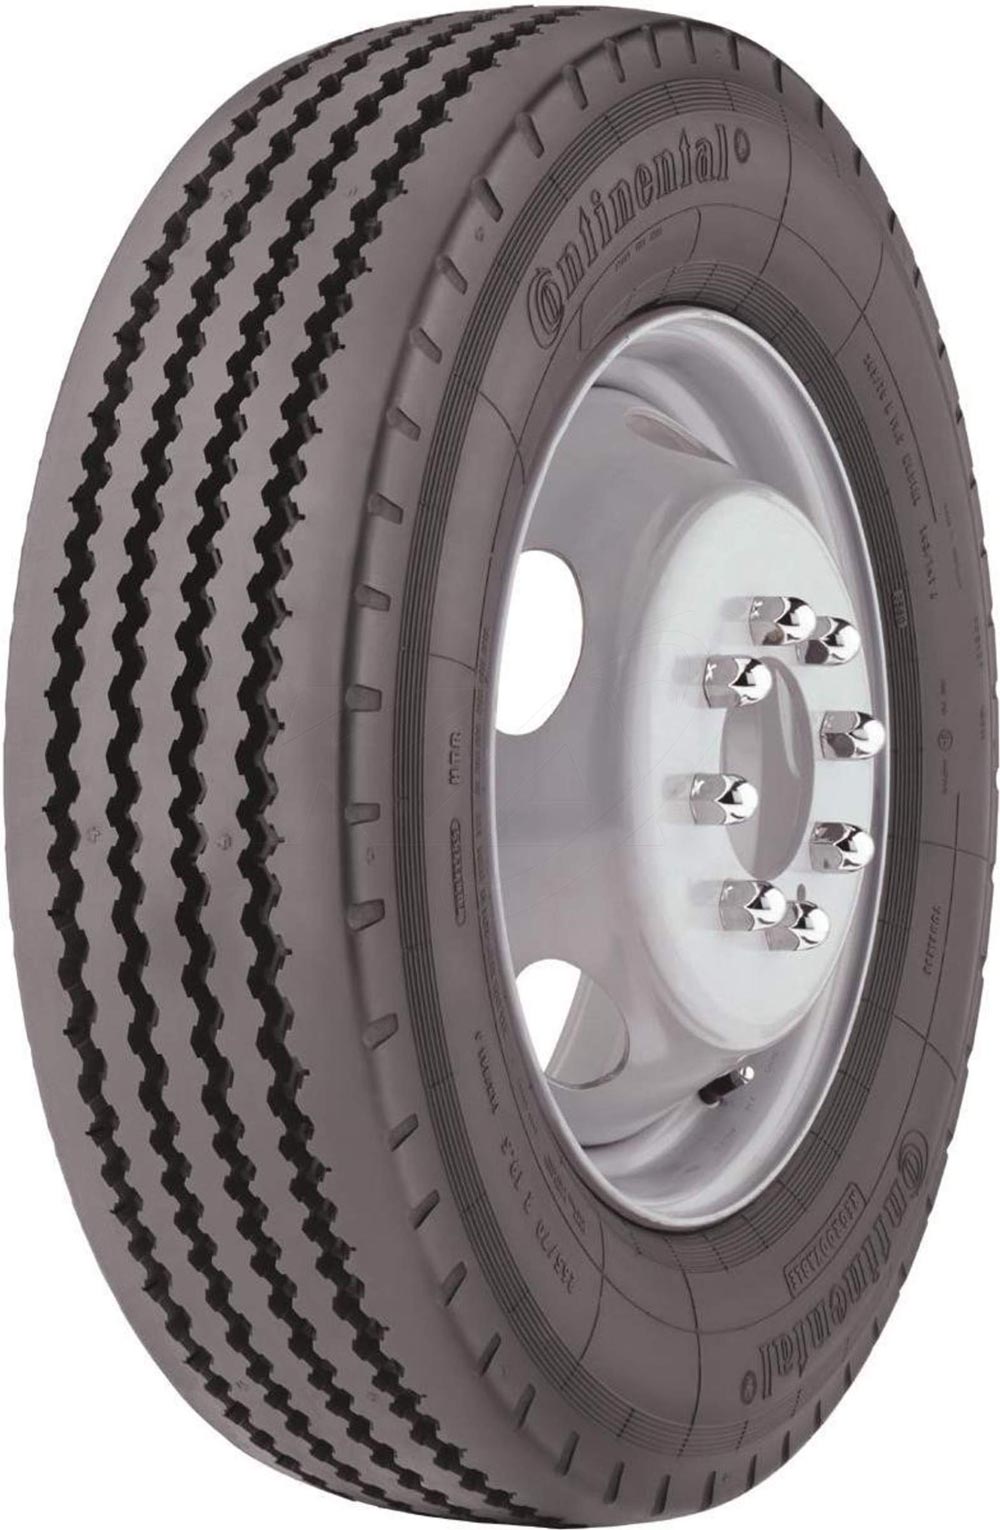 product_type-heavy_tires CONTINENTAL HTR+ 18PR 8.25 R15 143G